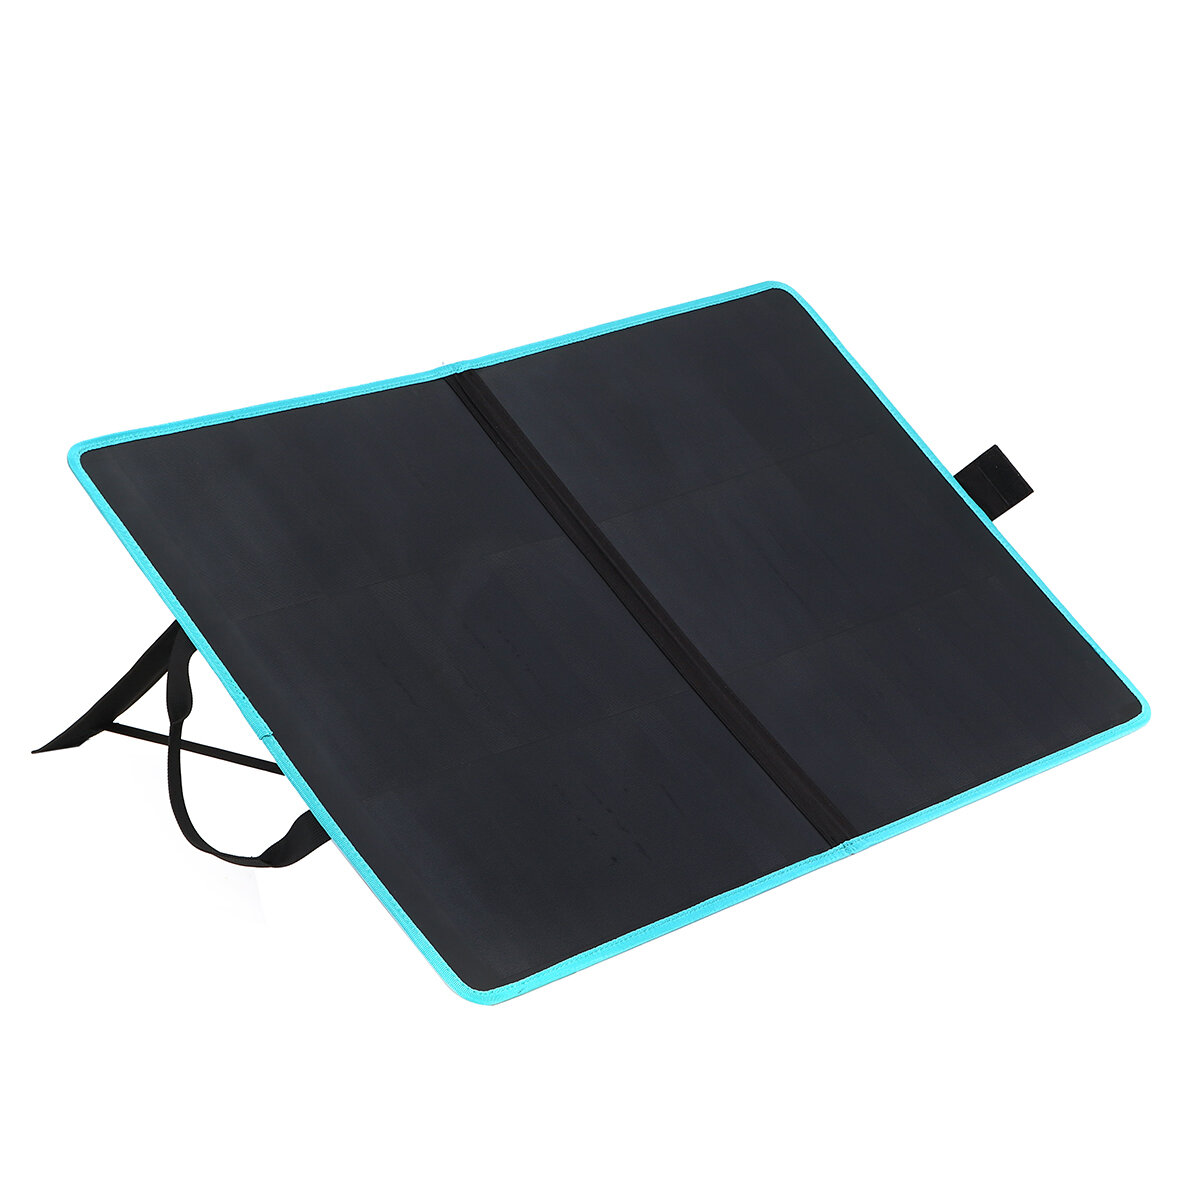 KROAK K-SP03 100W 18.15V Shingled Solar Panel Foldable Outdoor Waterproof Portable Superior Monocrystalline Solar Power Cell Battery Charger for Car Camping Phone